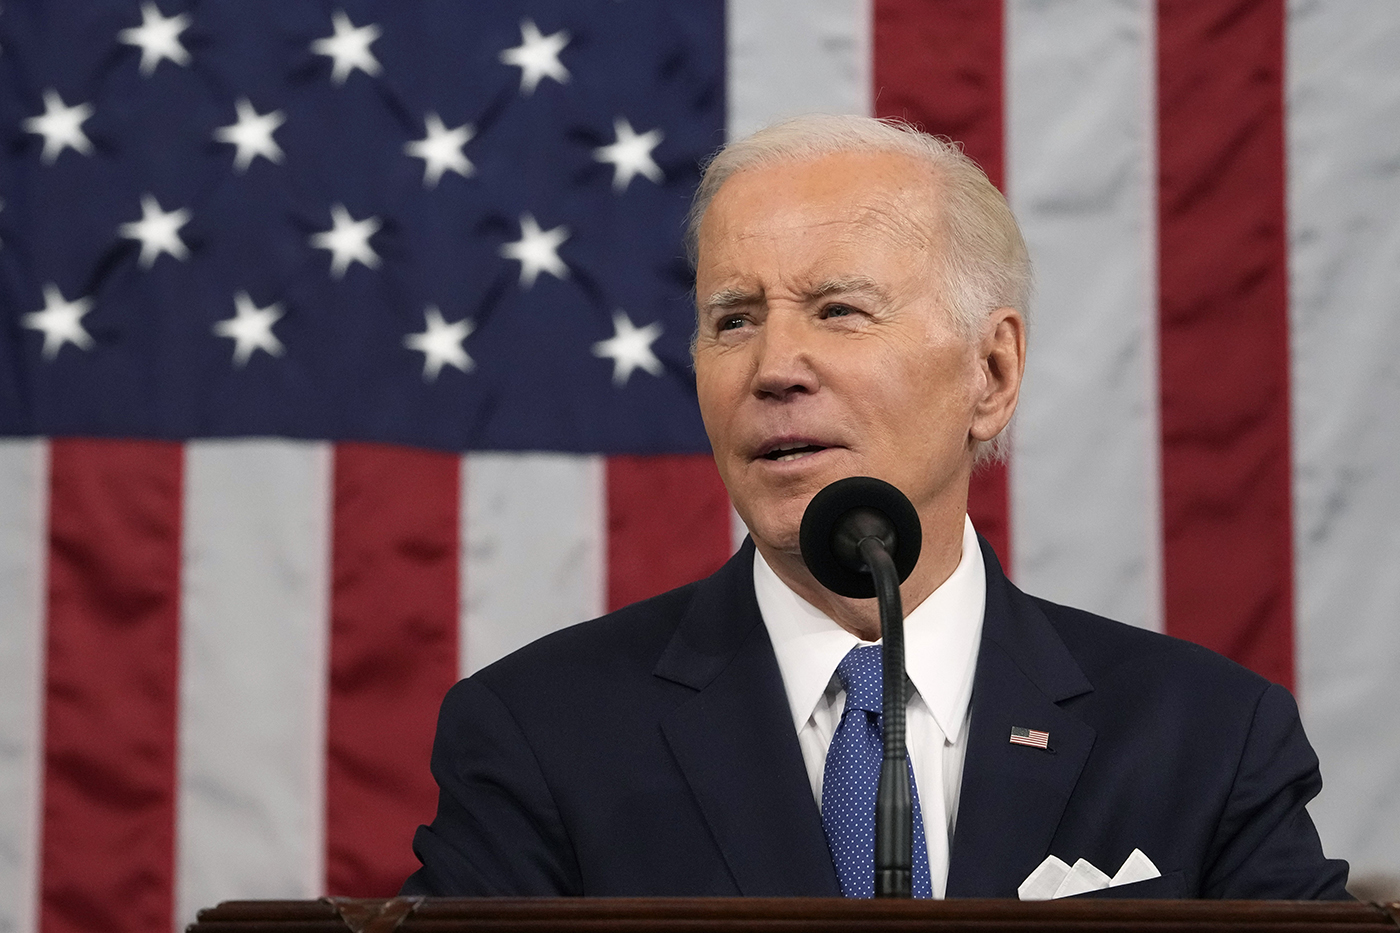 president biden speaking into microphone delivering the state of the union address